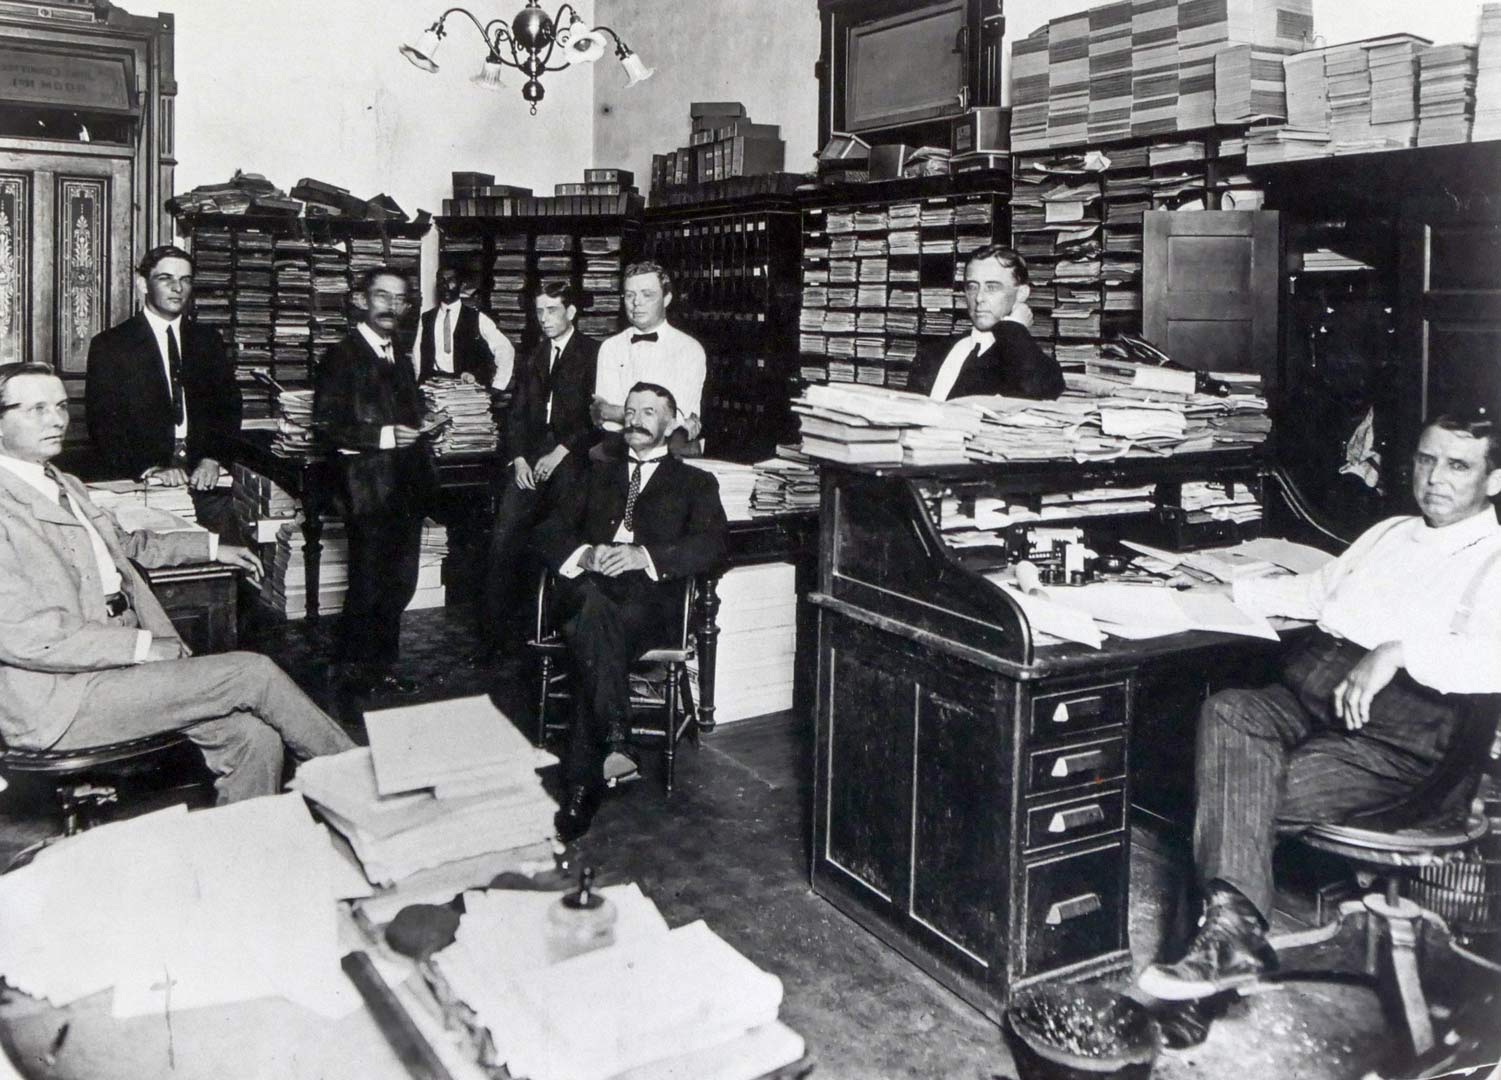 Engineering Division of the Railroad Commission office. Capitol Building in the early 1900s